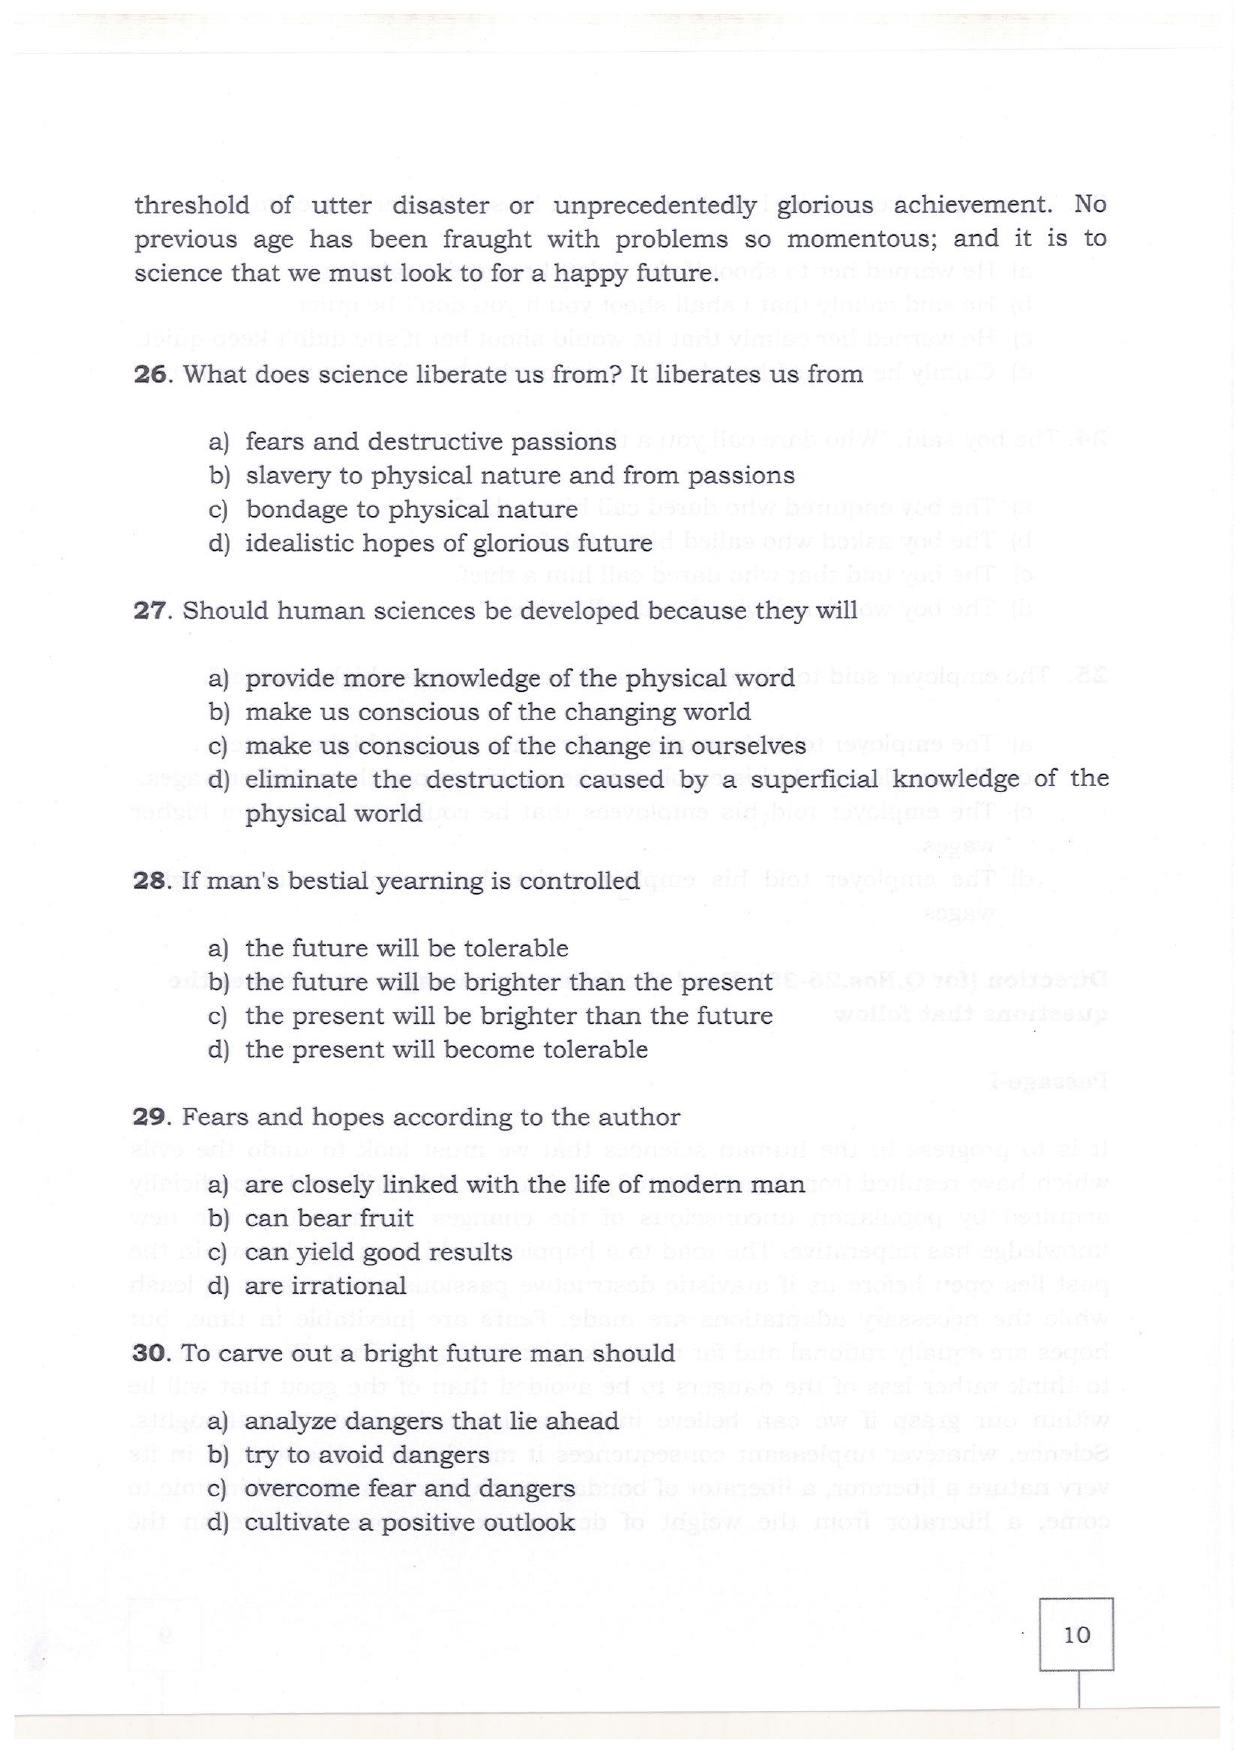 KMAT Question Papers - February 2019 - Page 8